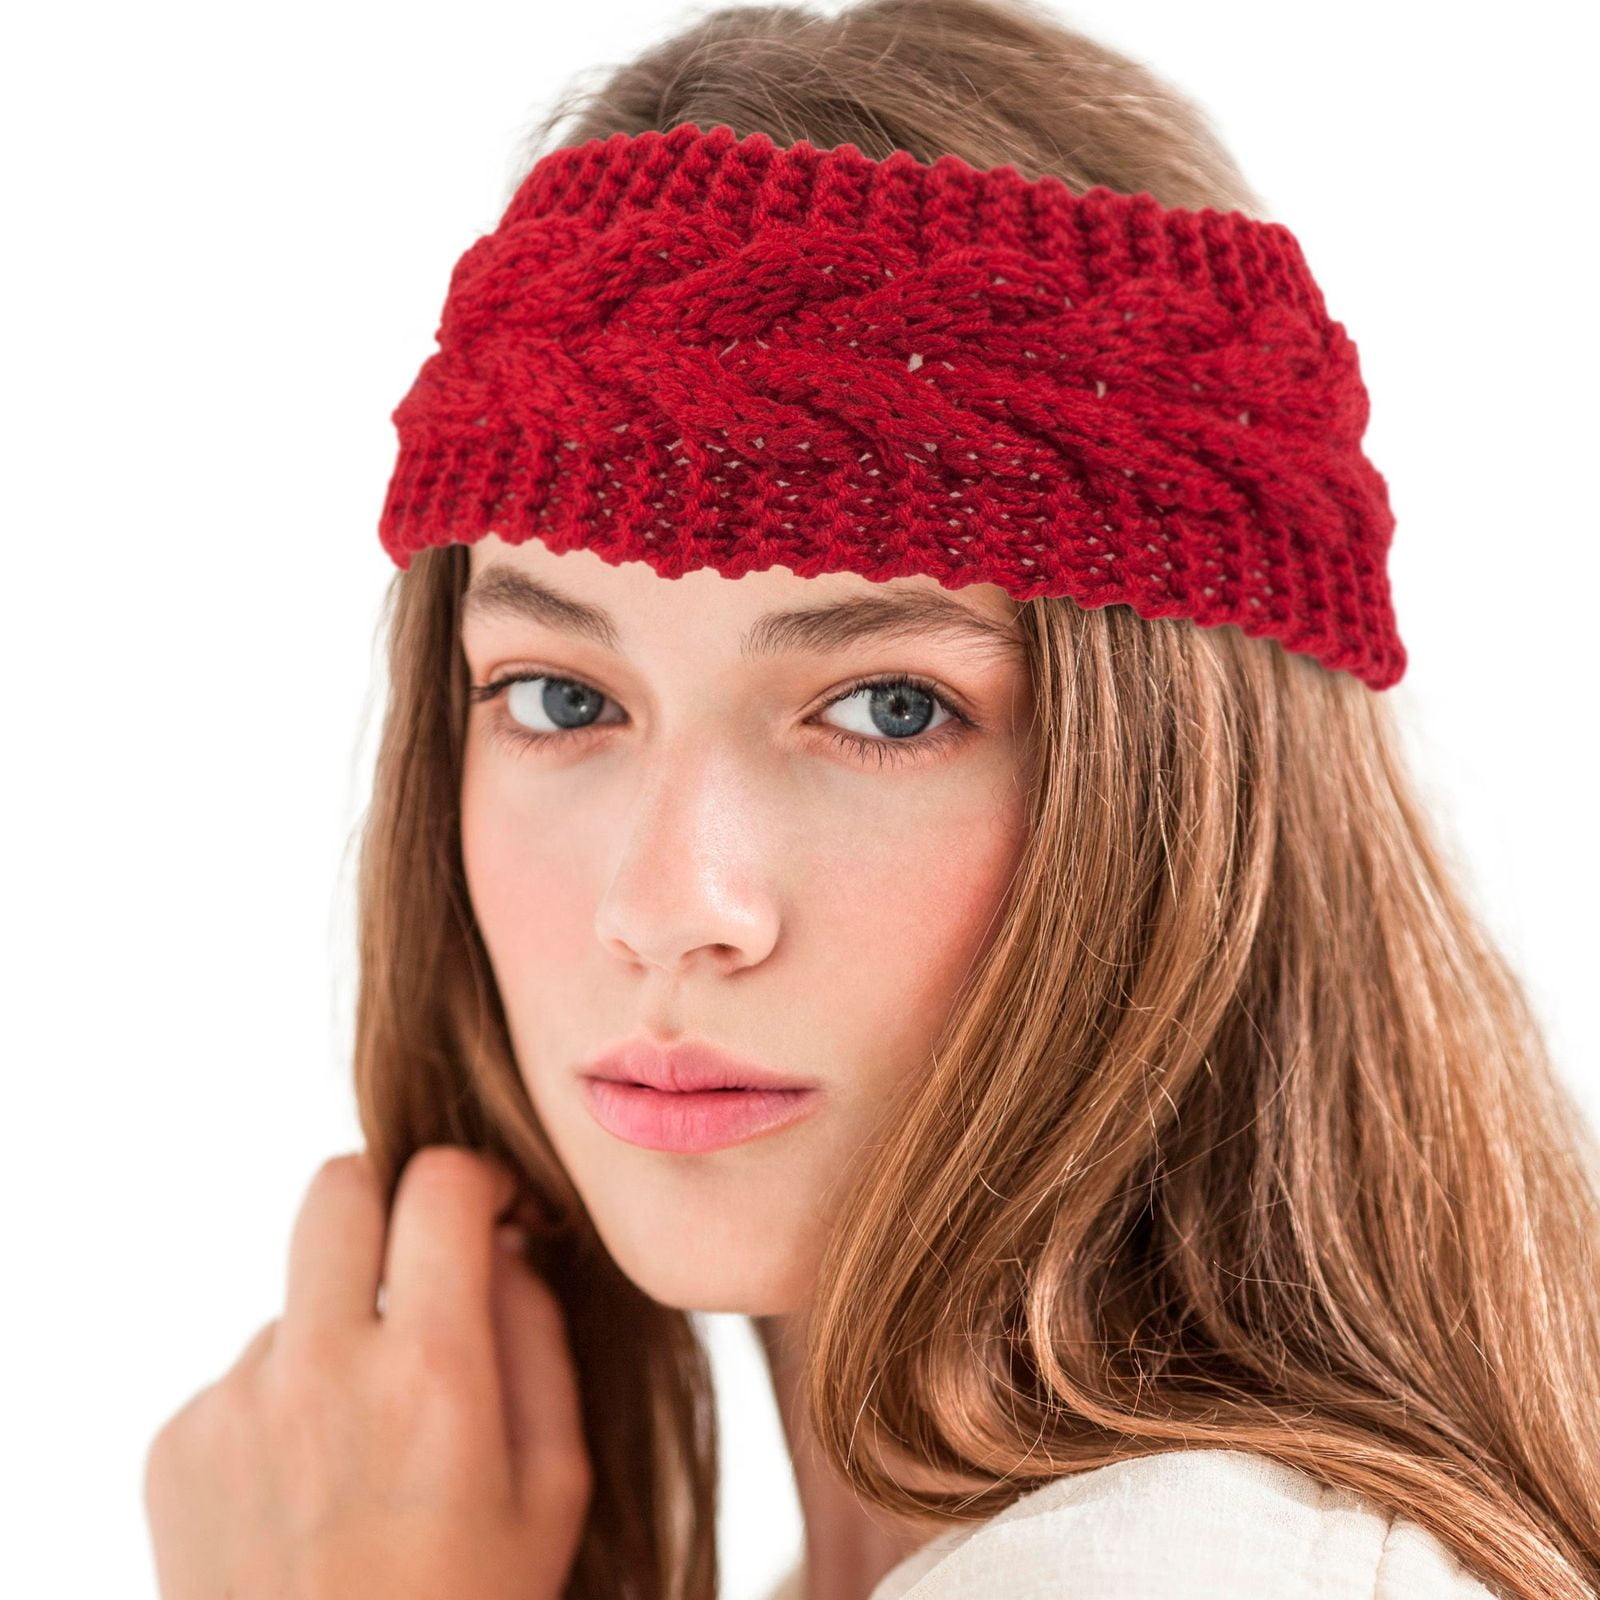 Details about   Classic Knit Stretchy HeadBand Ear warmer RED Hair band 3 1/4 inches wide Warm